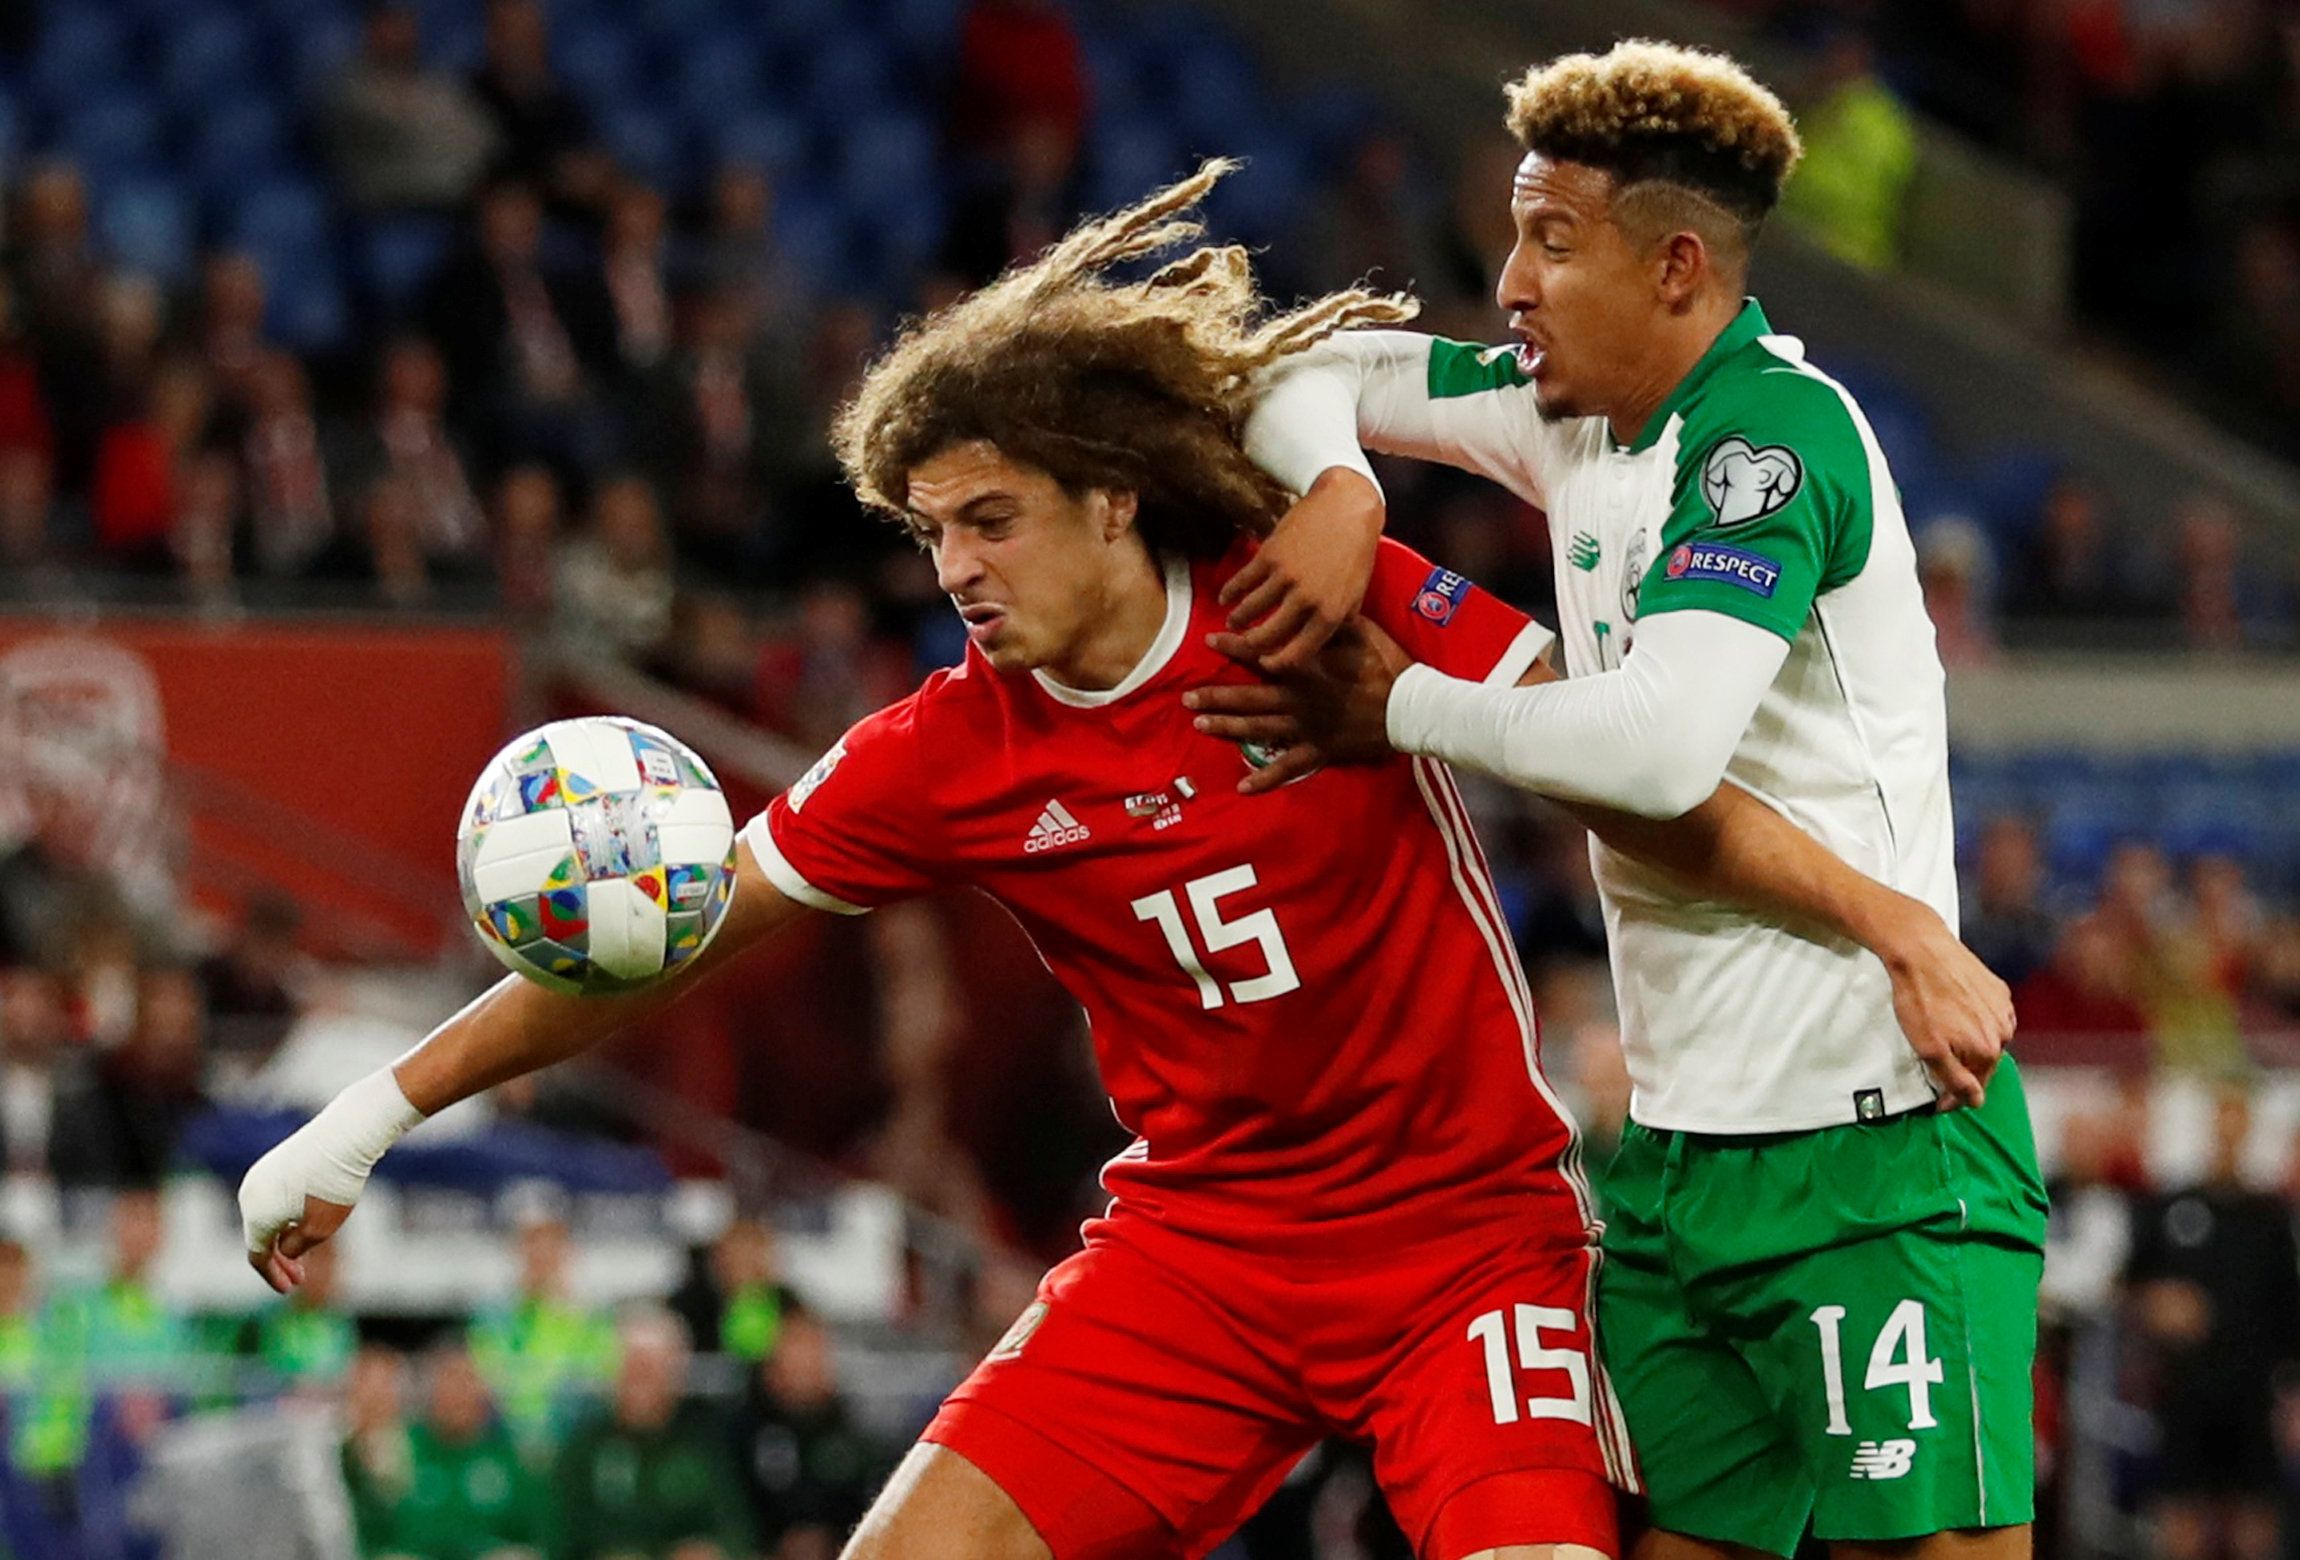 Soccer Football - UEFA Nations League - League B - Group 4 - Wales v Republic of Ireland - Cardiff City Stadium, Cardiff, Britain - September 6, 2018  Wales' Ethan Ampadu in action with Republic of Ireland's Callum Robinson     Action Images via Reuters/Andrew Boyers